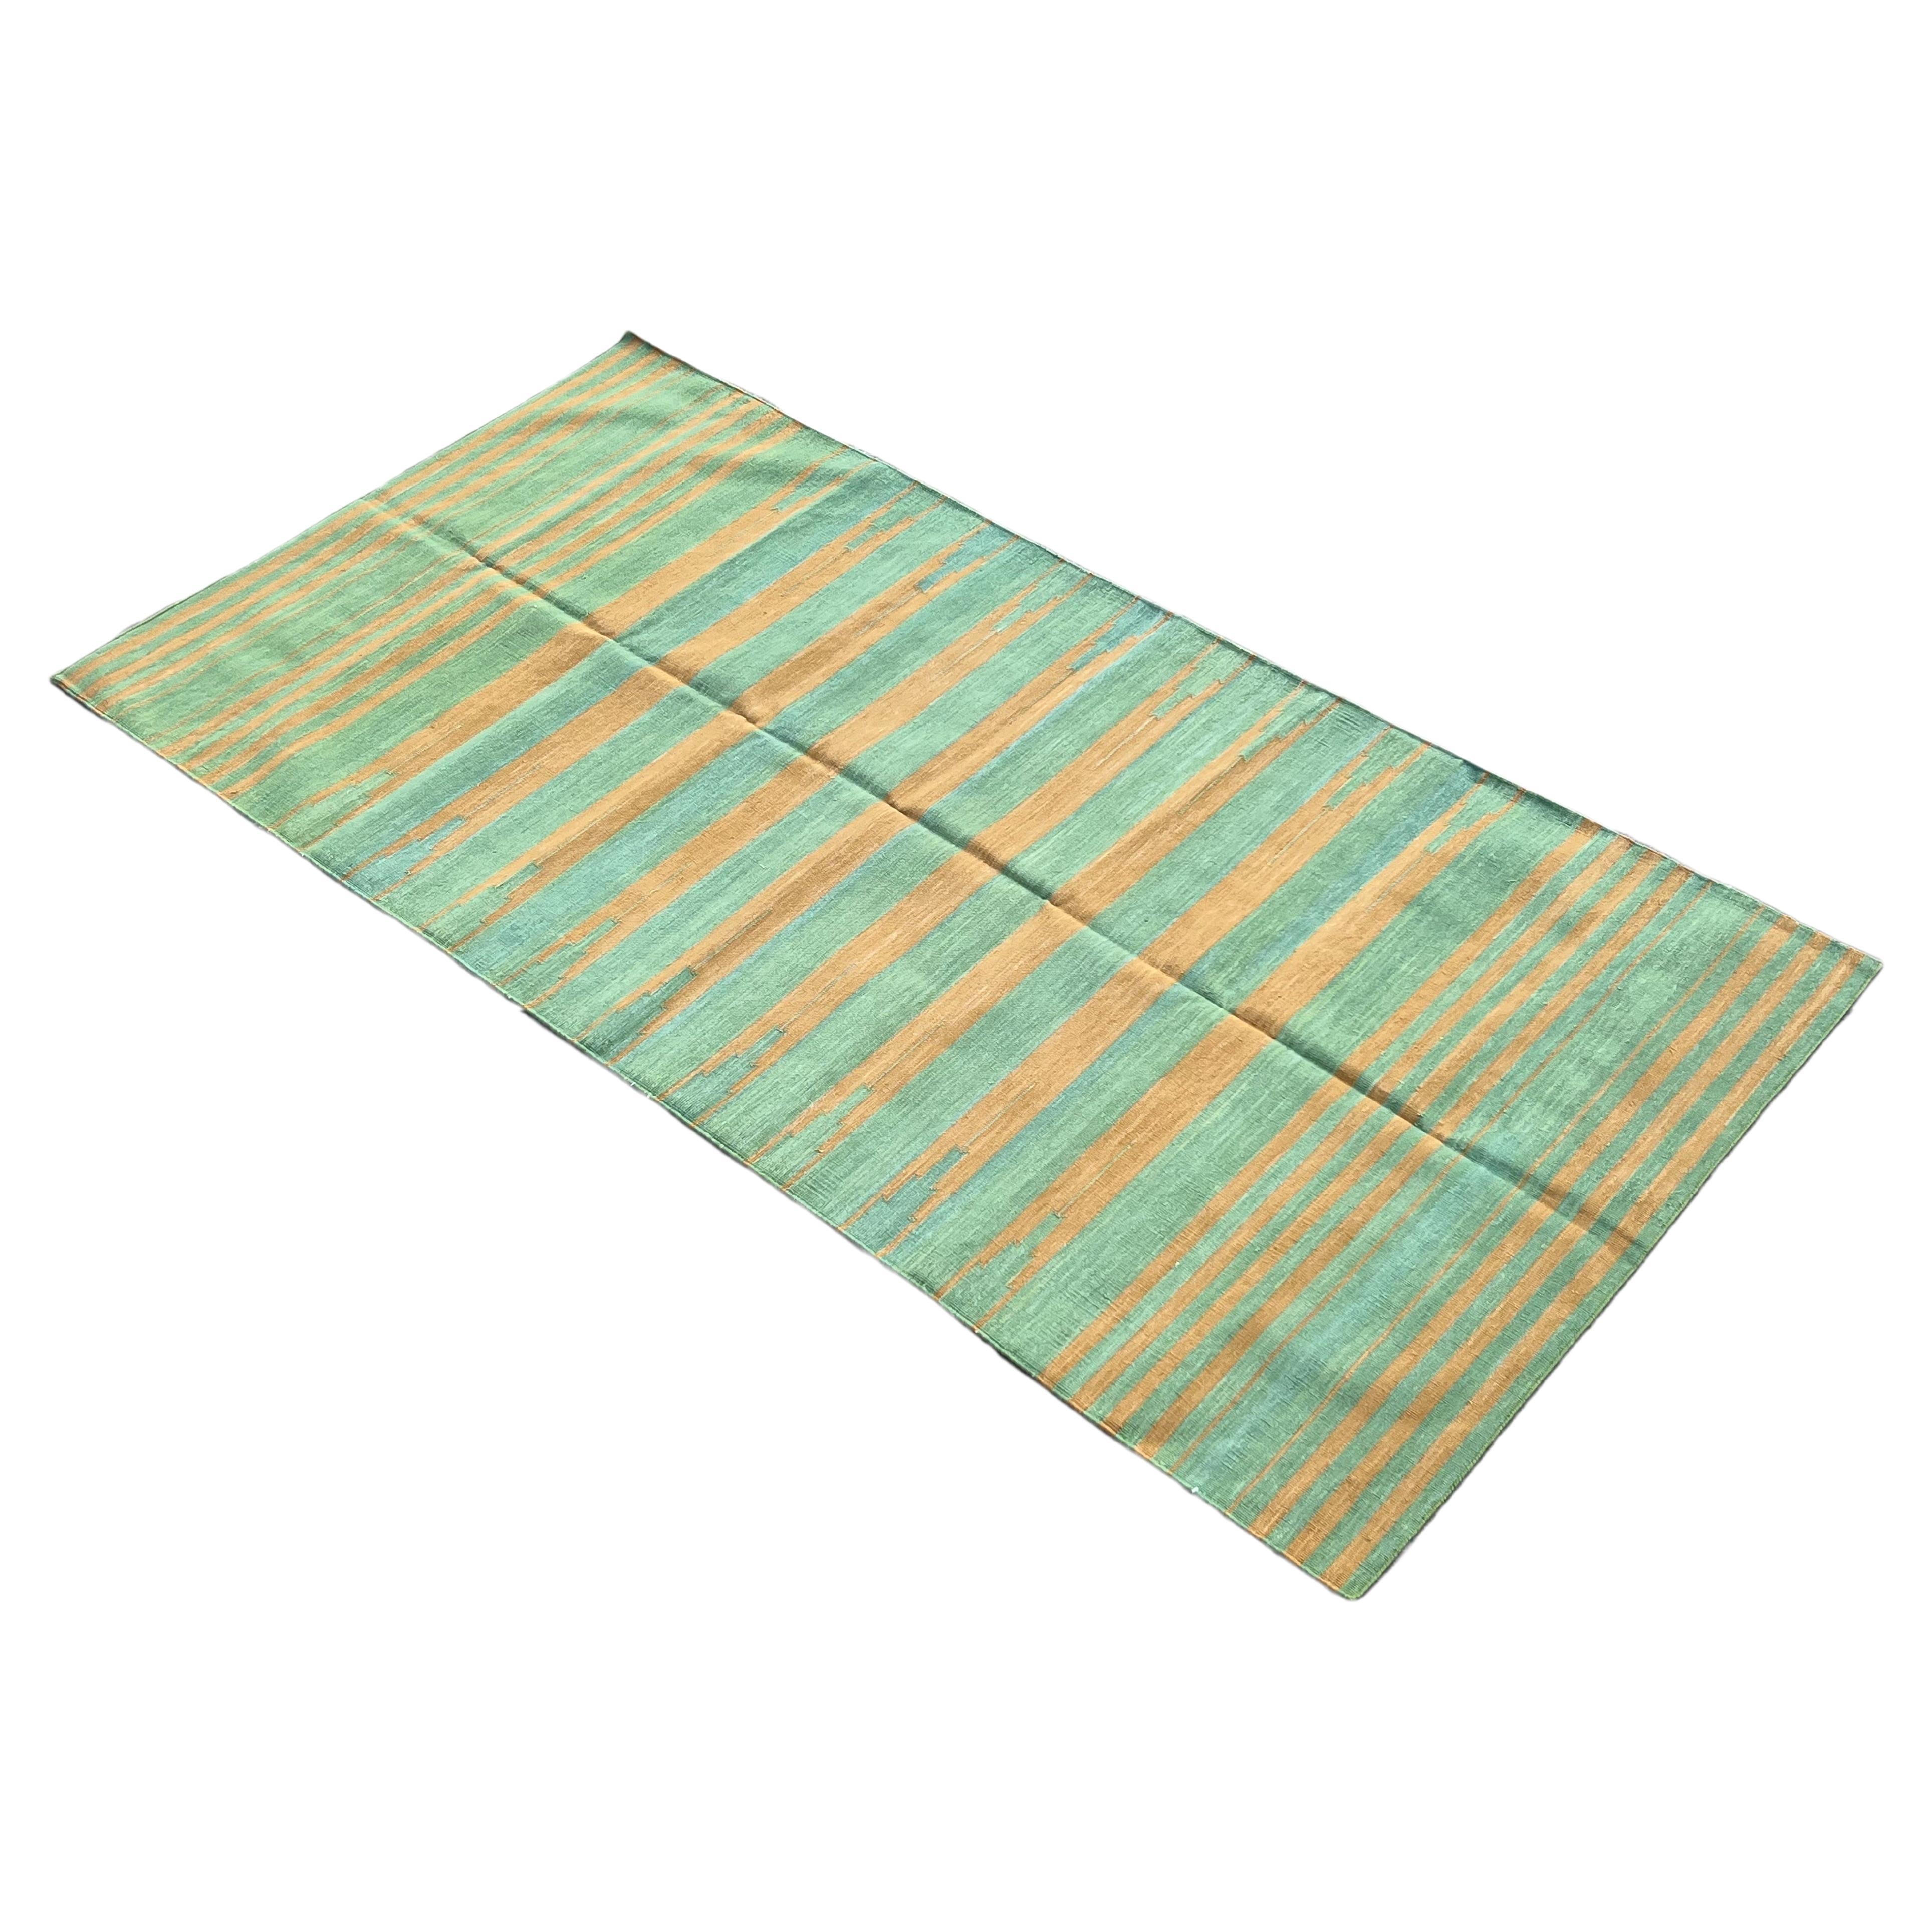 Handmade Cotton Area Flat Weave Rug, 5x8 Green And Mustard Stripe Indian Dhurrie For Sale